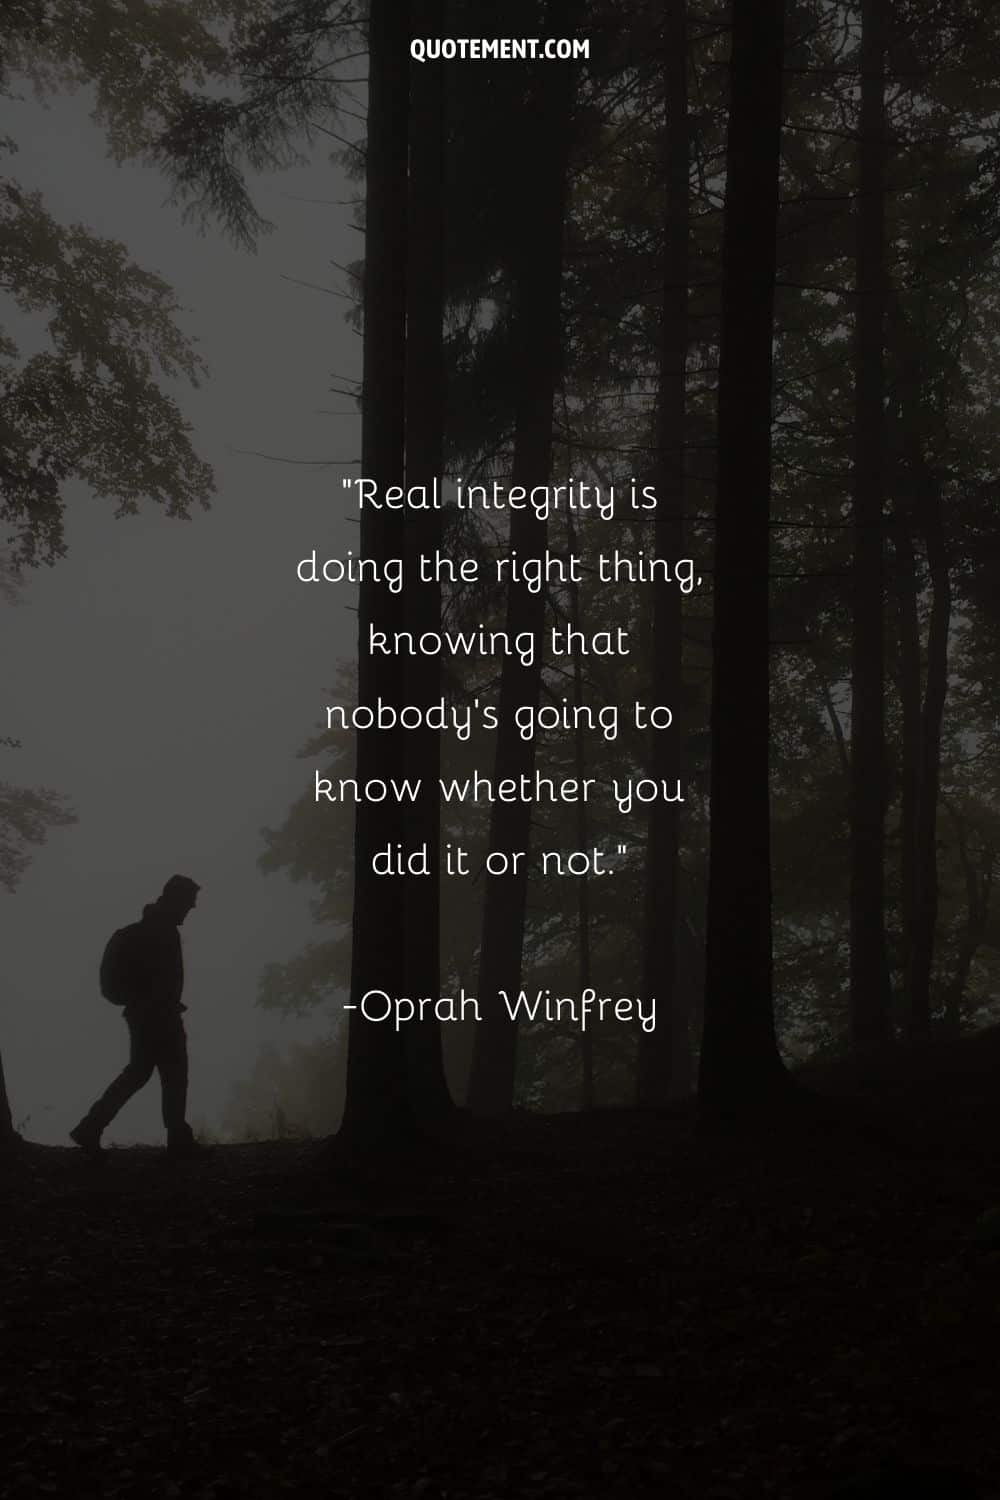 Real integrity is doing the right thing, knowing that nobody’s going to know whether you did it or not